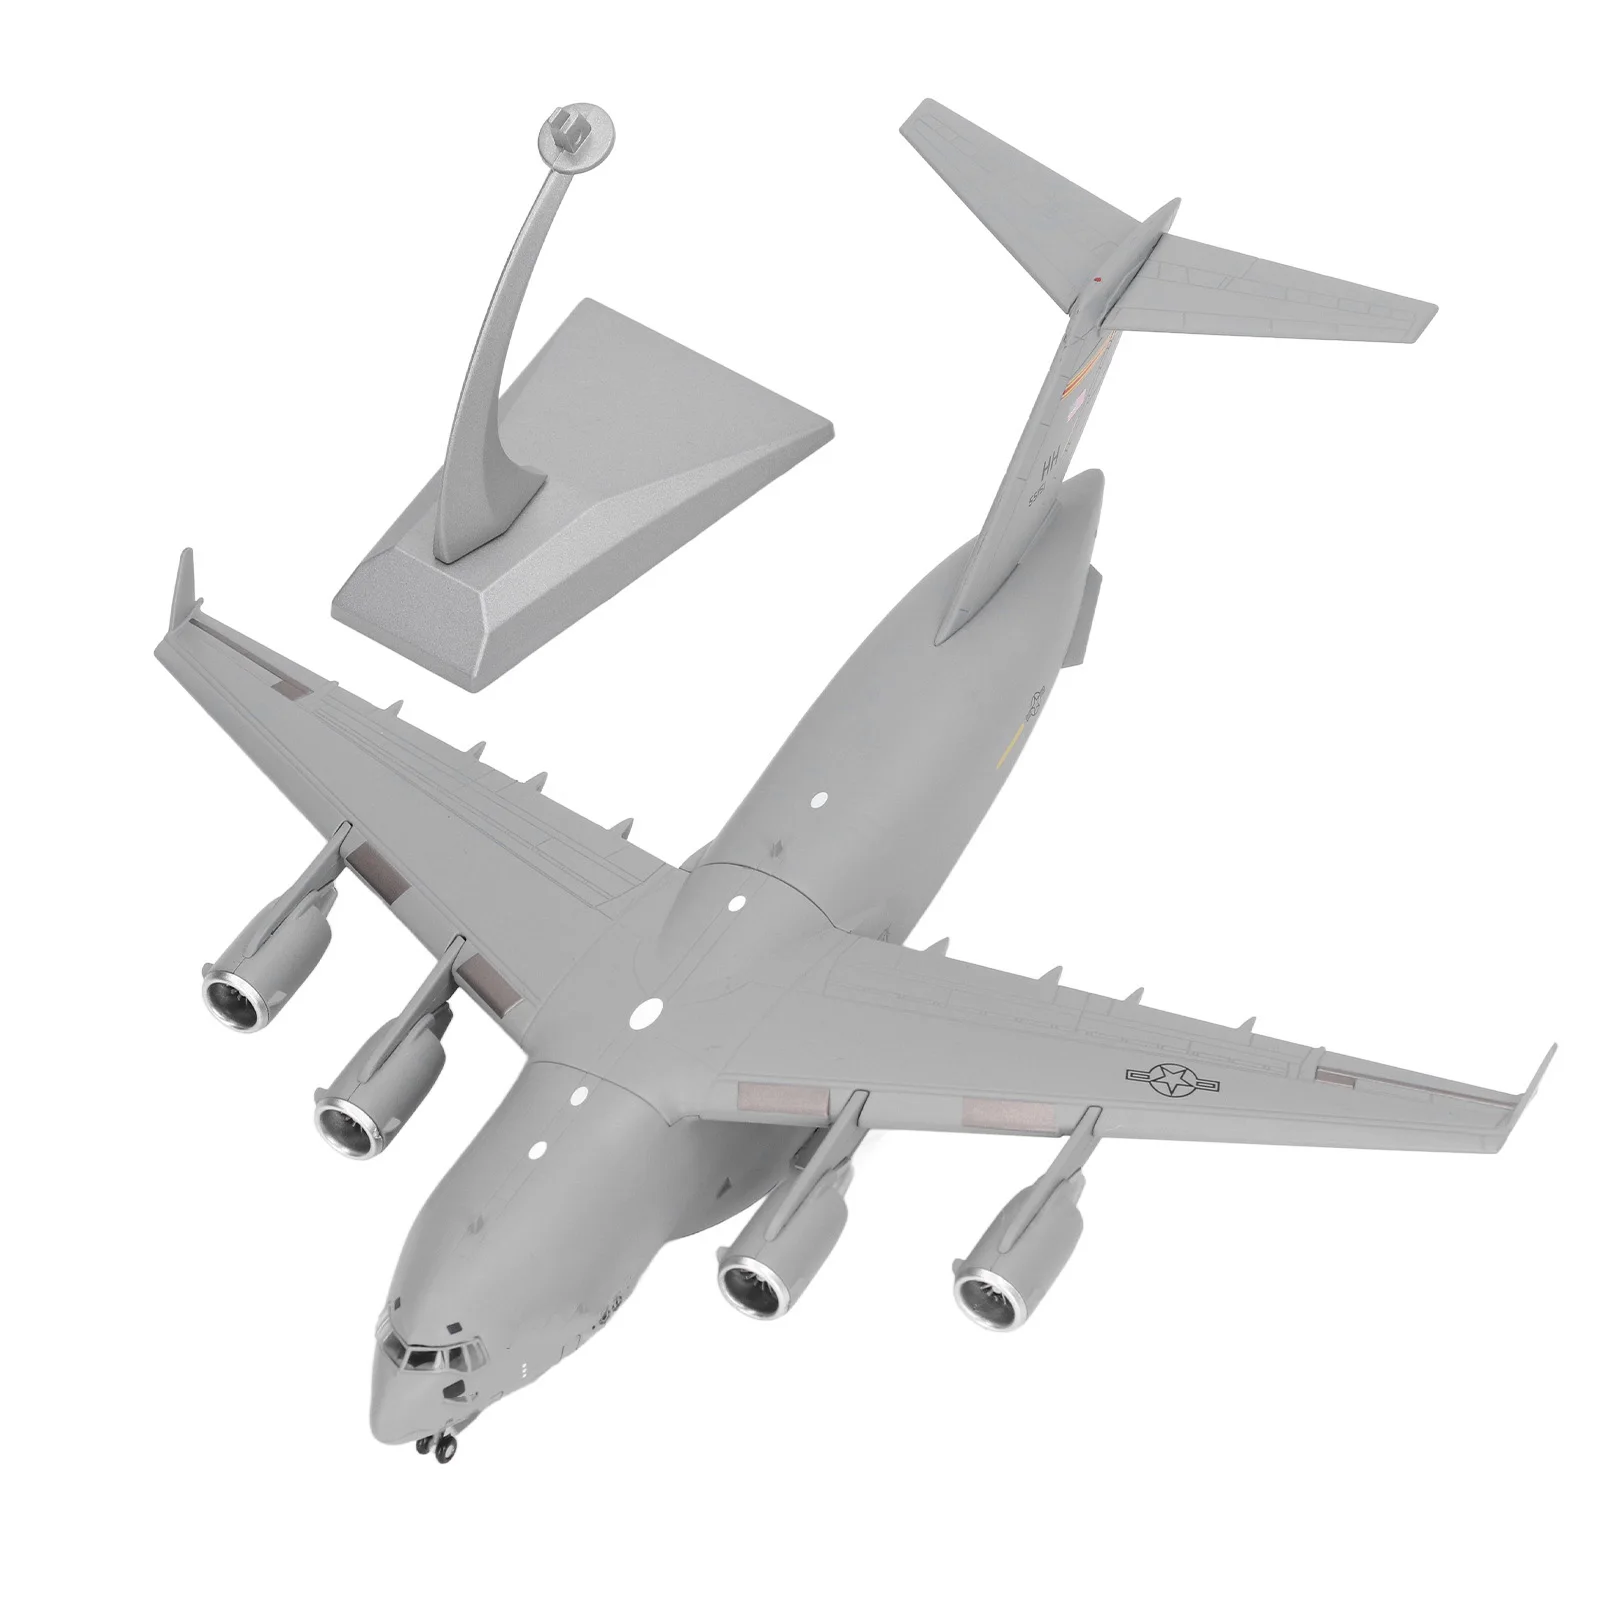 1:200 Scale Aircraft Model Alloy Diecast Simulation Transport Plane Toy With Stable Bracket For Kids Gift Home Decoration